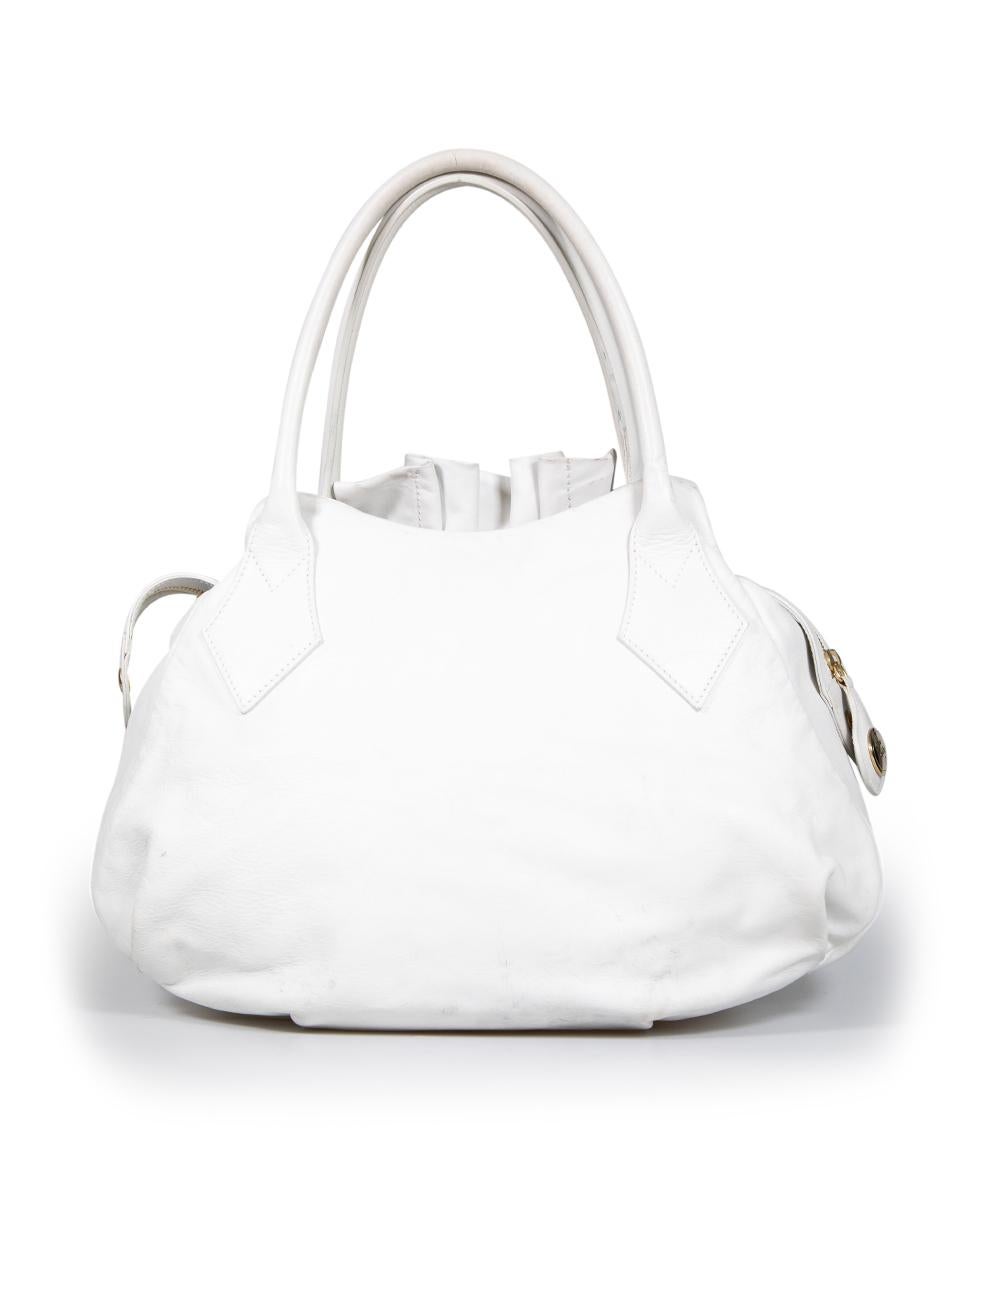 Vivienne Westwood White Leather Shoulder Bag In Good Condition For Sale In London, GB